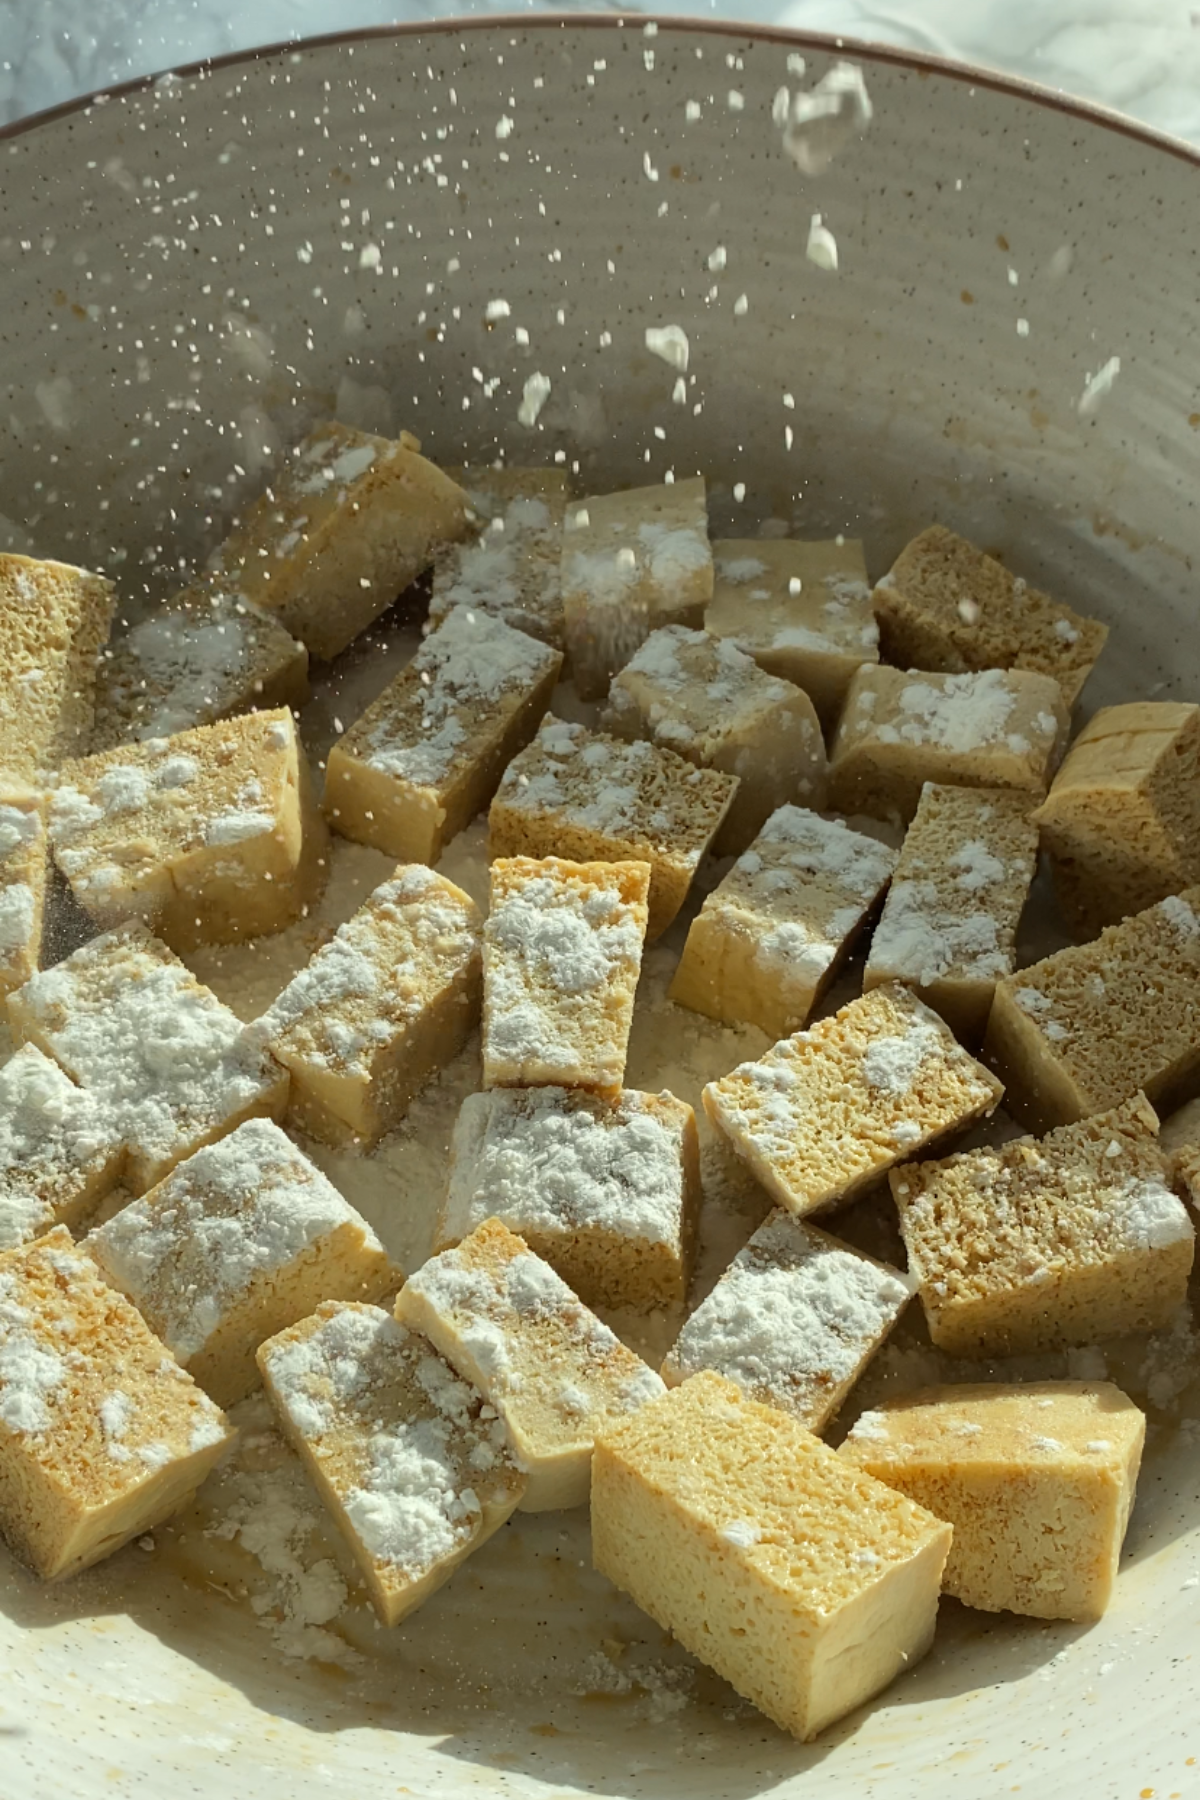 Corn starch sprinkled on tofu cubes.